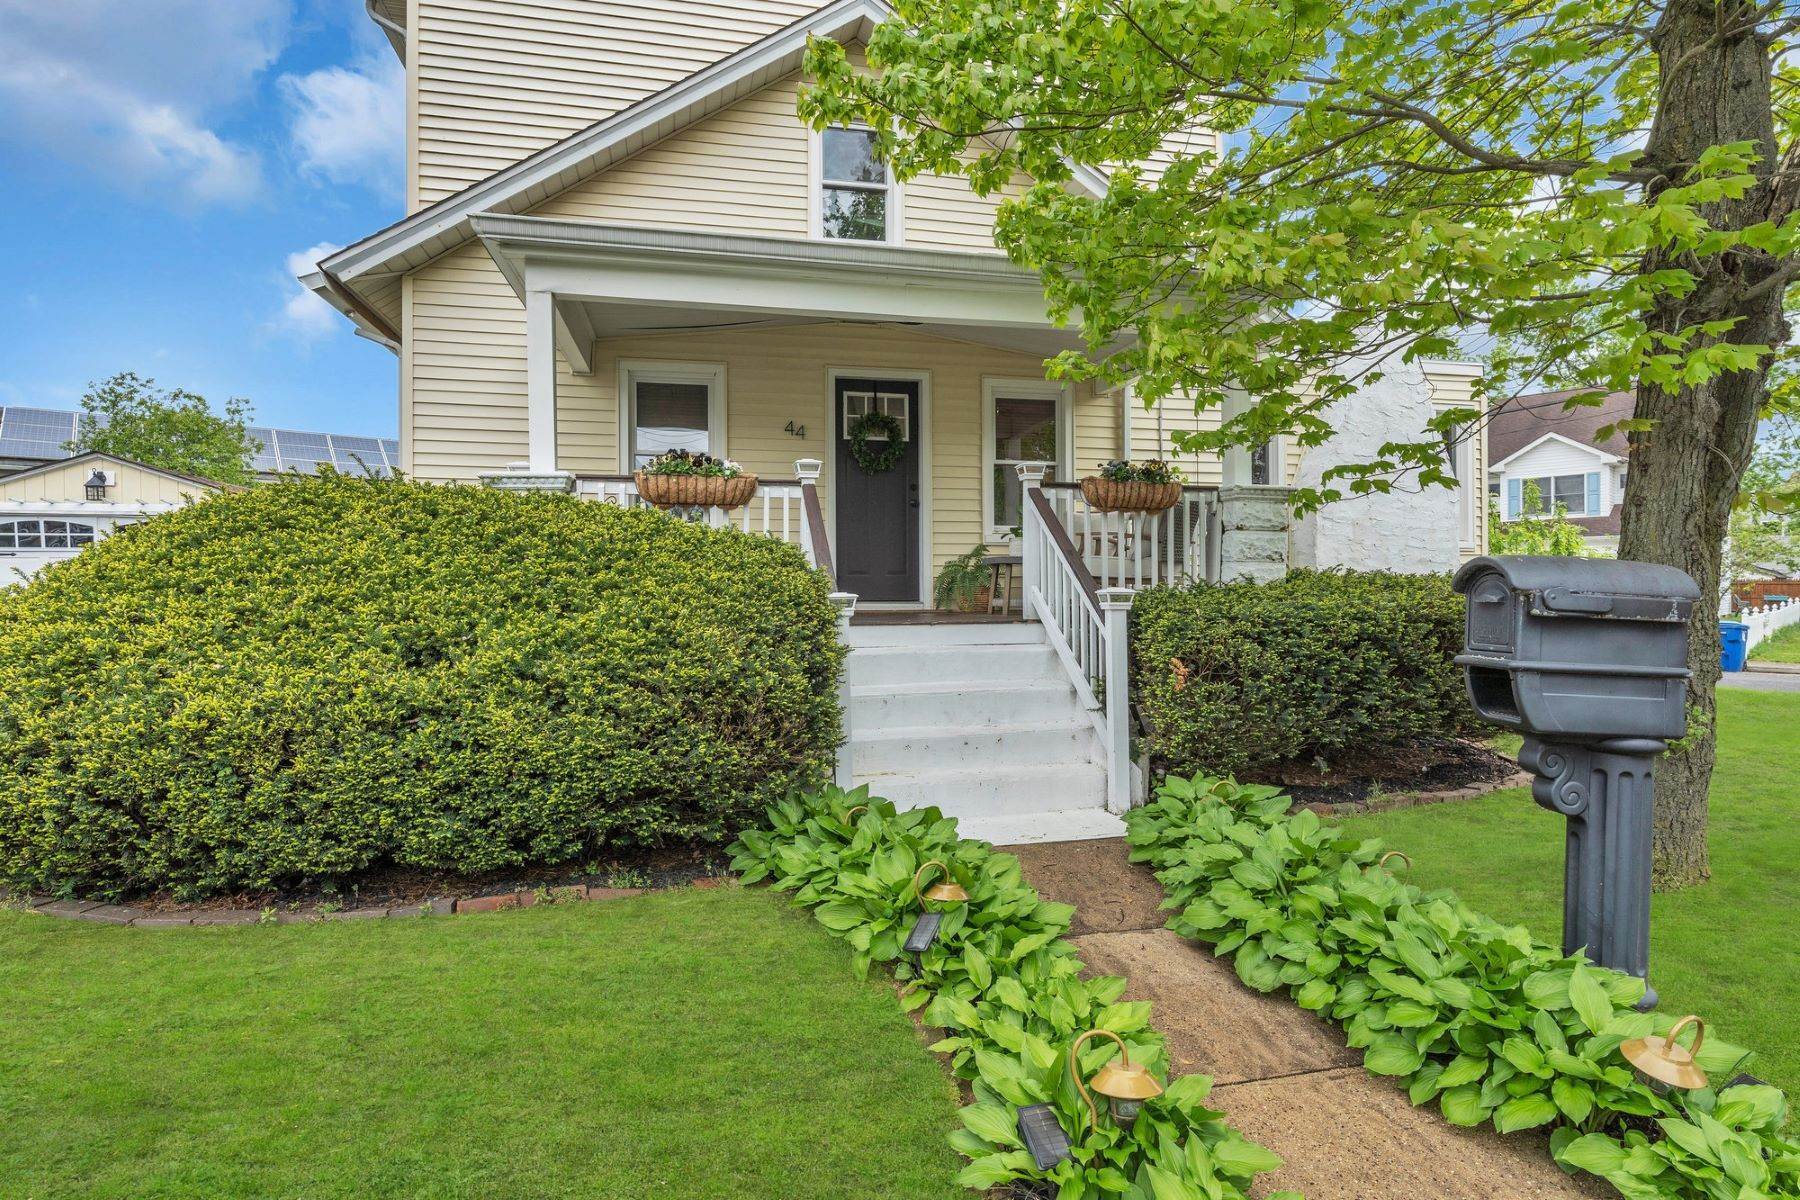 5. Single Family Homes for Sale at Charming Seashore Home 44 Clinton Street Middletown, New Jersey 07748 United States